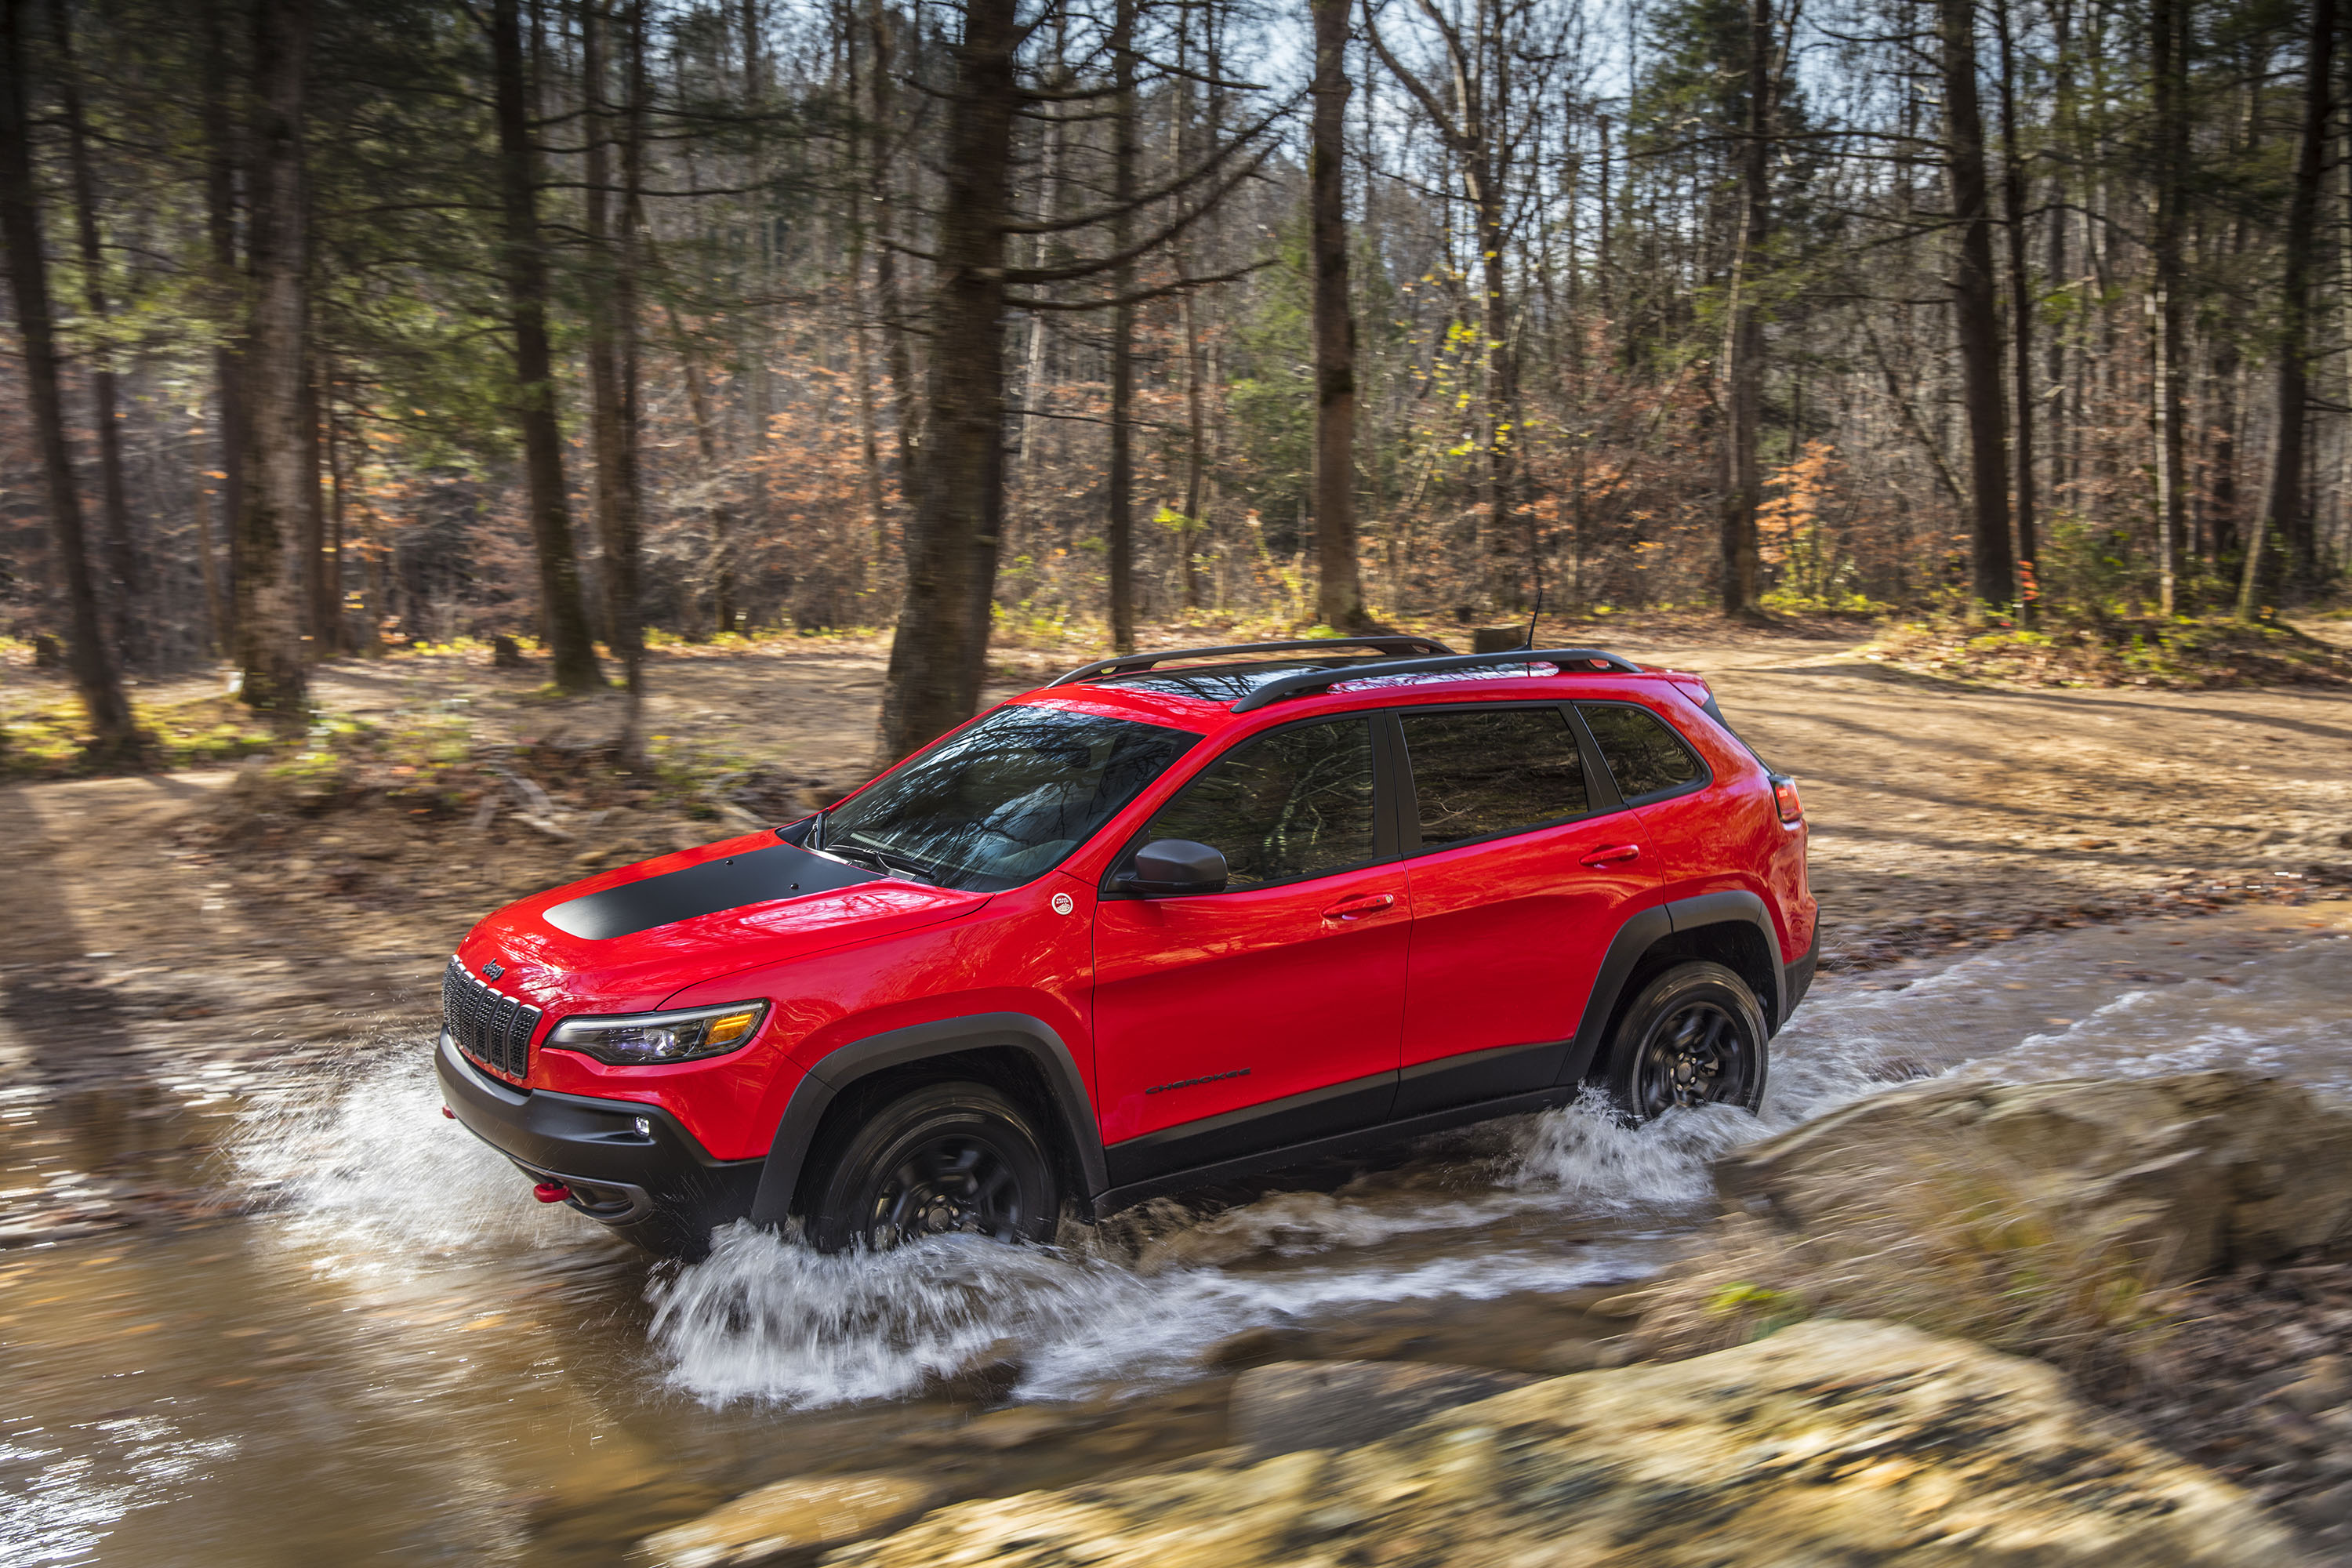 Wallpaper Of The Day: 2019 Jeep Grand Cherokee